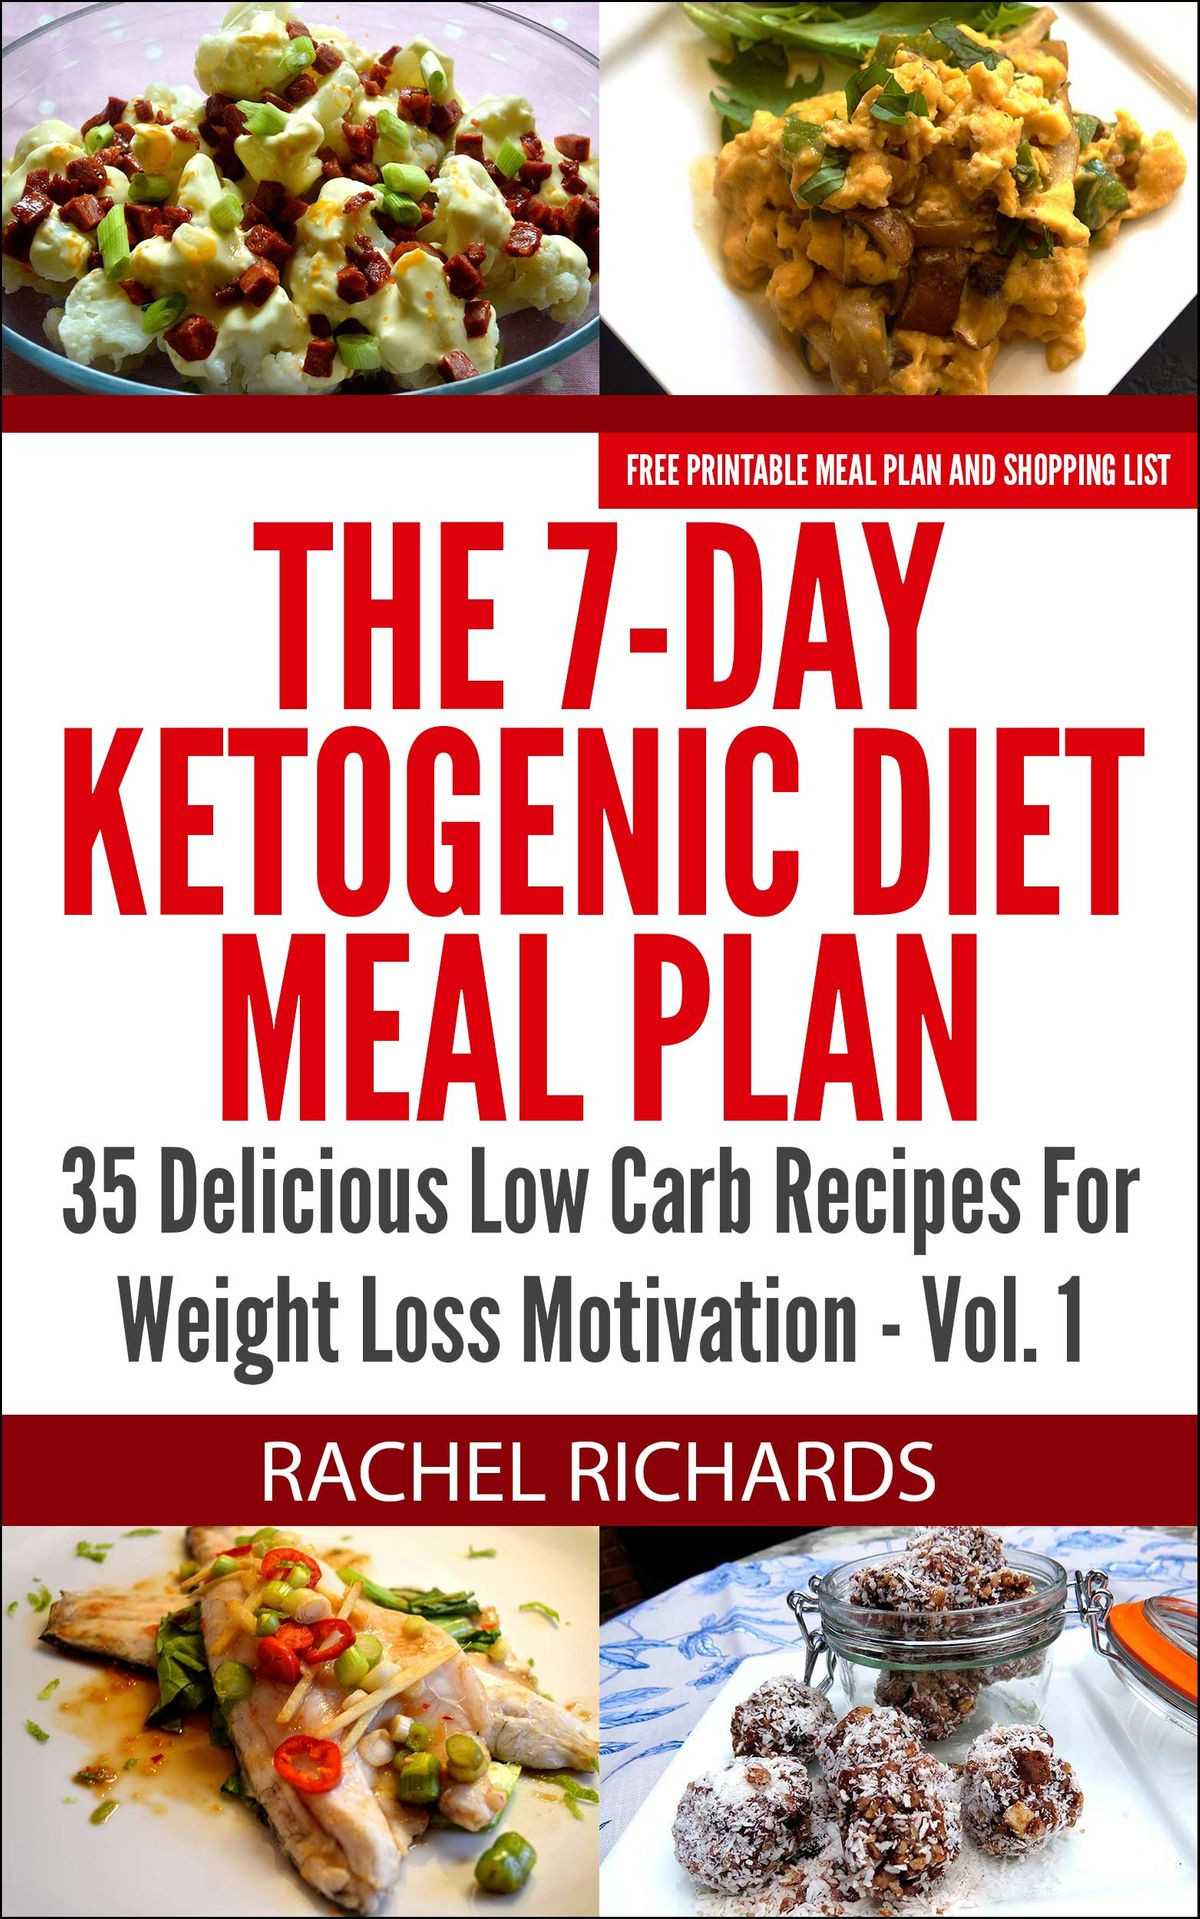 Low Carb Diet Low Carb Diet Plan 21 Days
 The 7 Day Ketogenic Diet Meal Plan 35 Delicious Low Carb